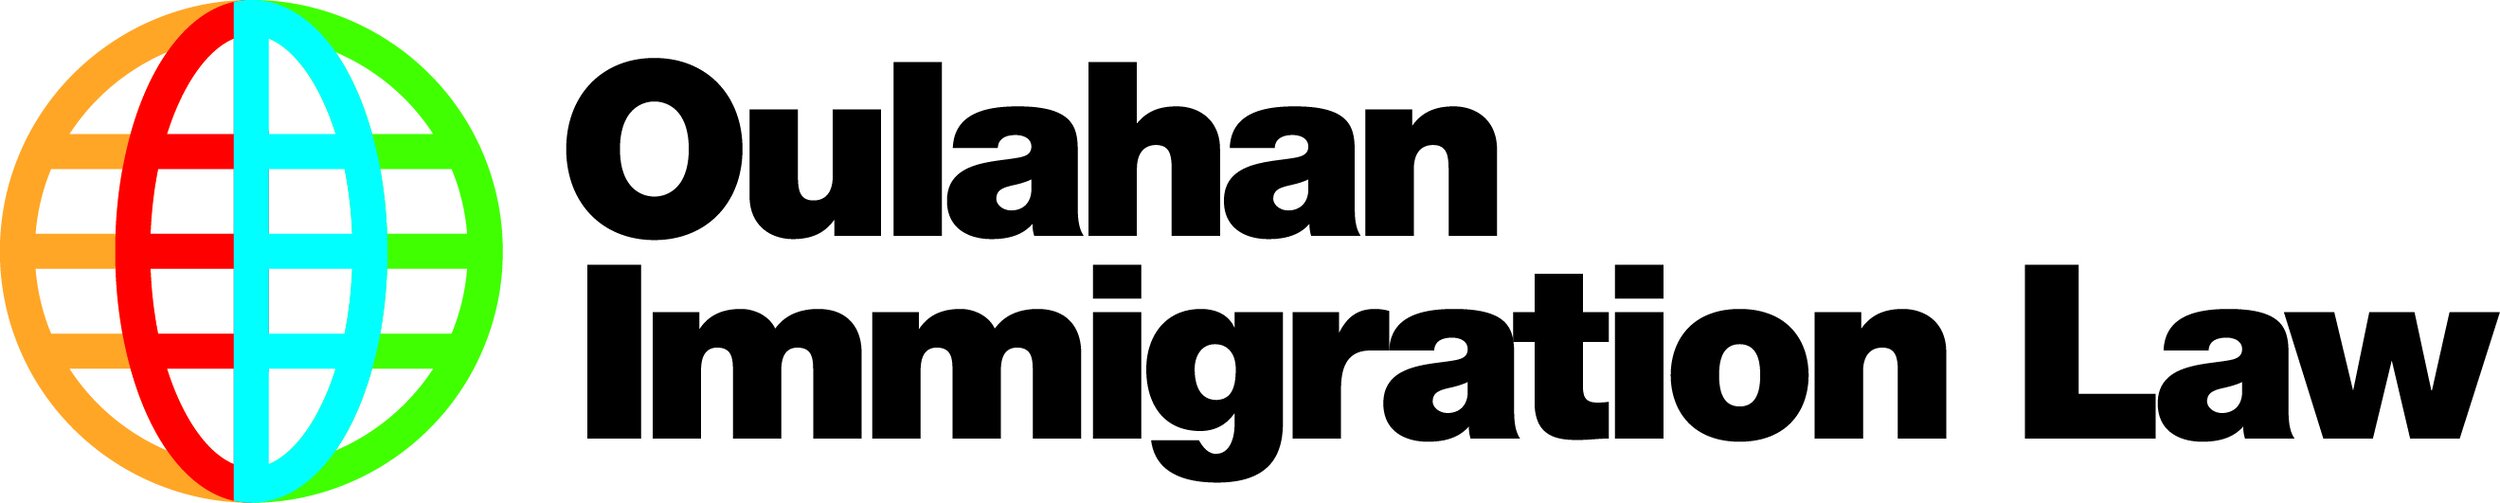 Oulahan Immigration Law, SC